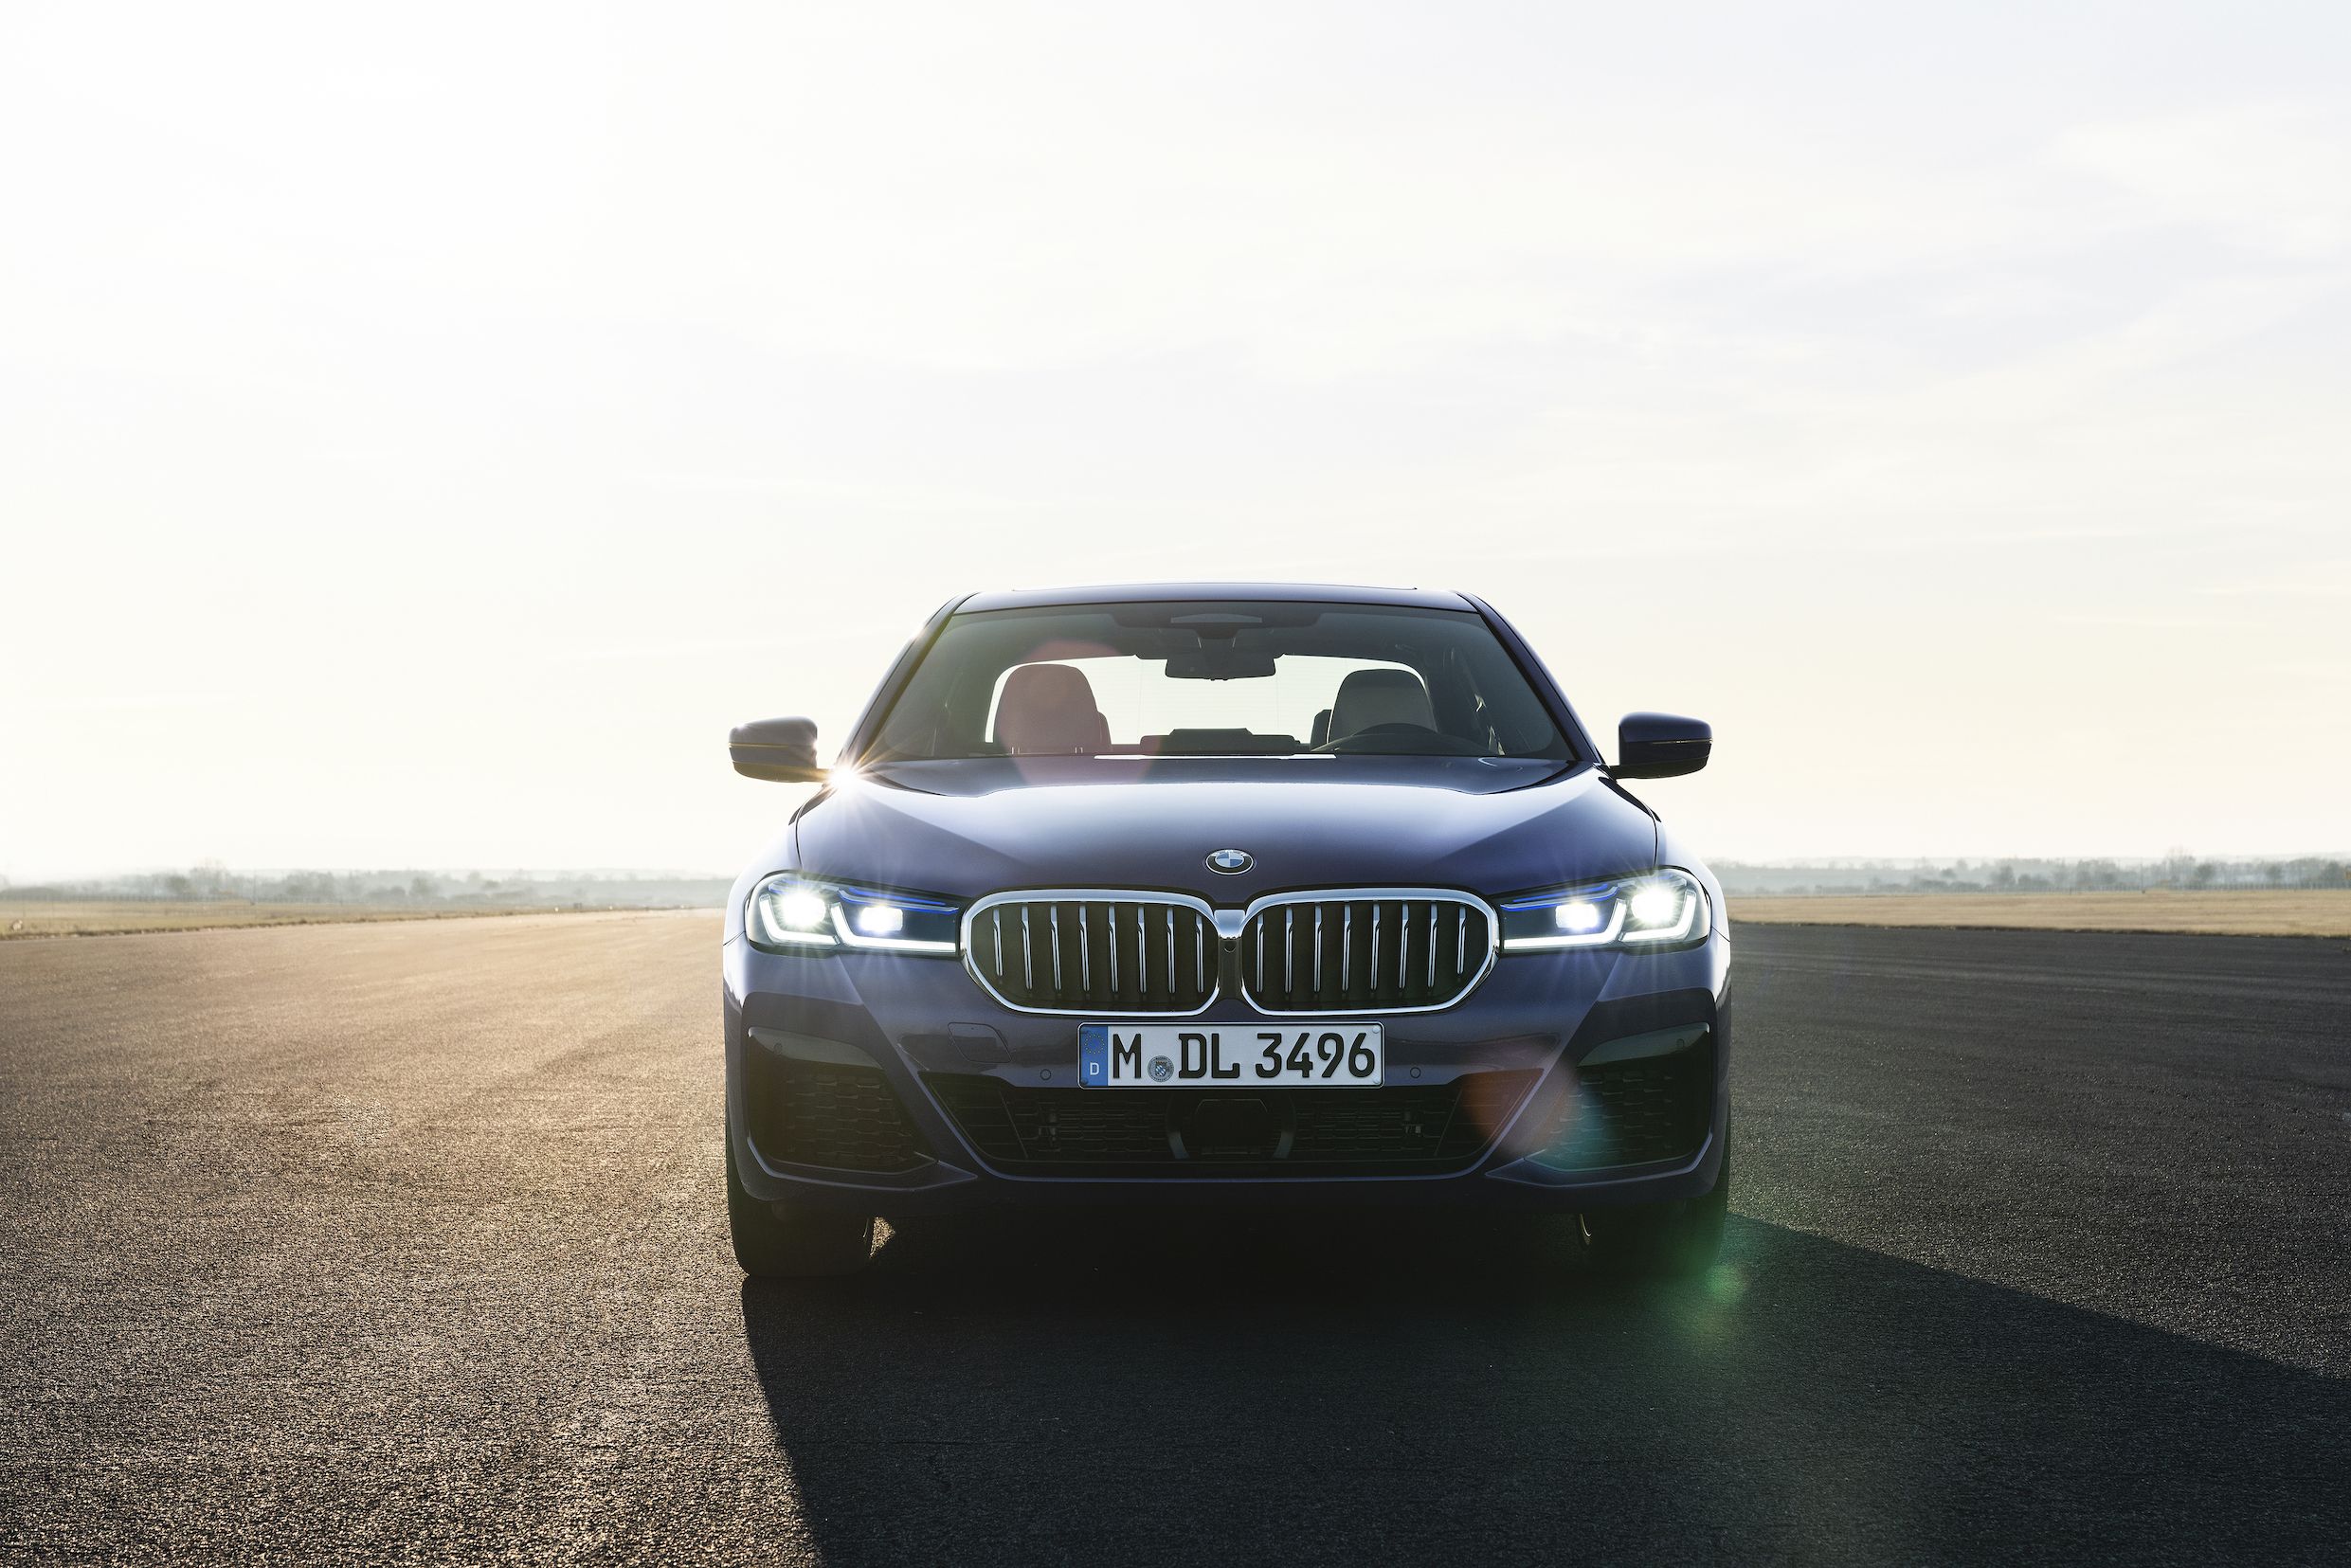 5-Series, X1 Electric Models Their Way